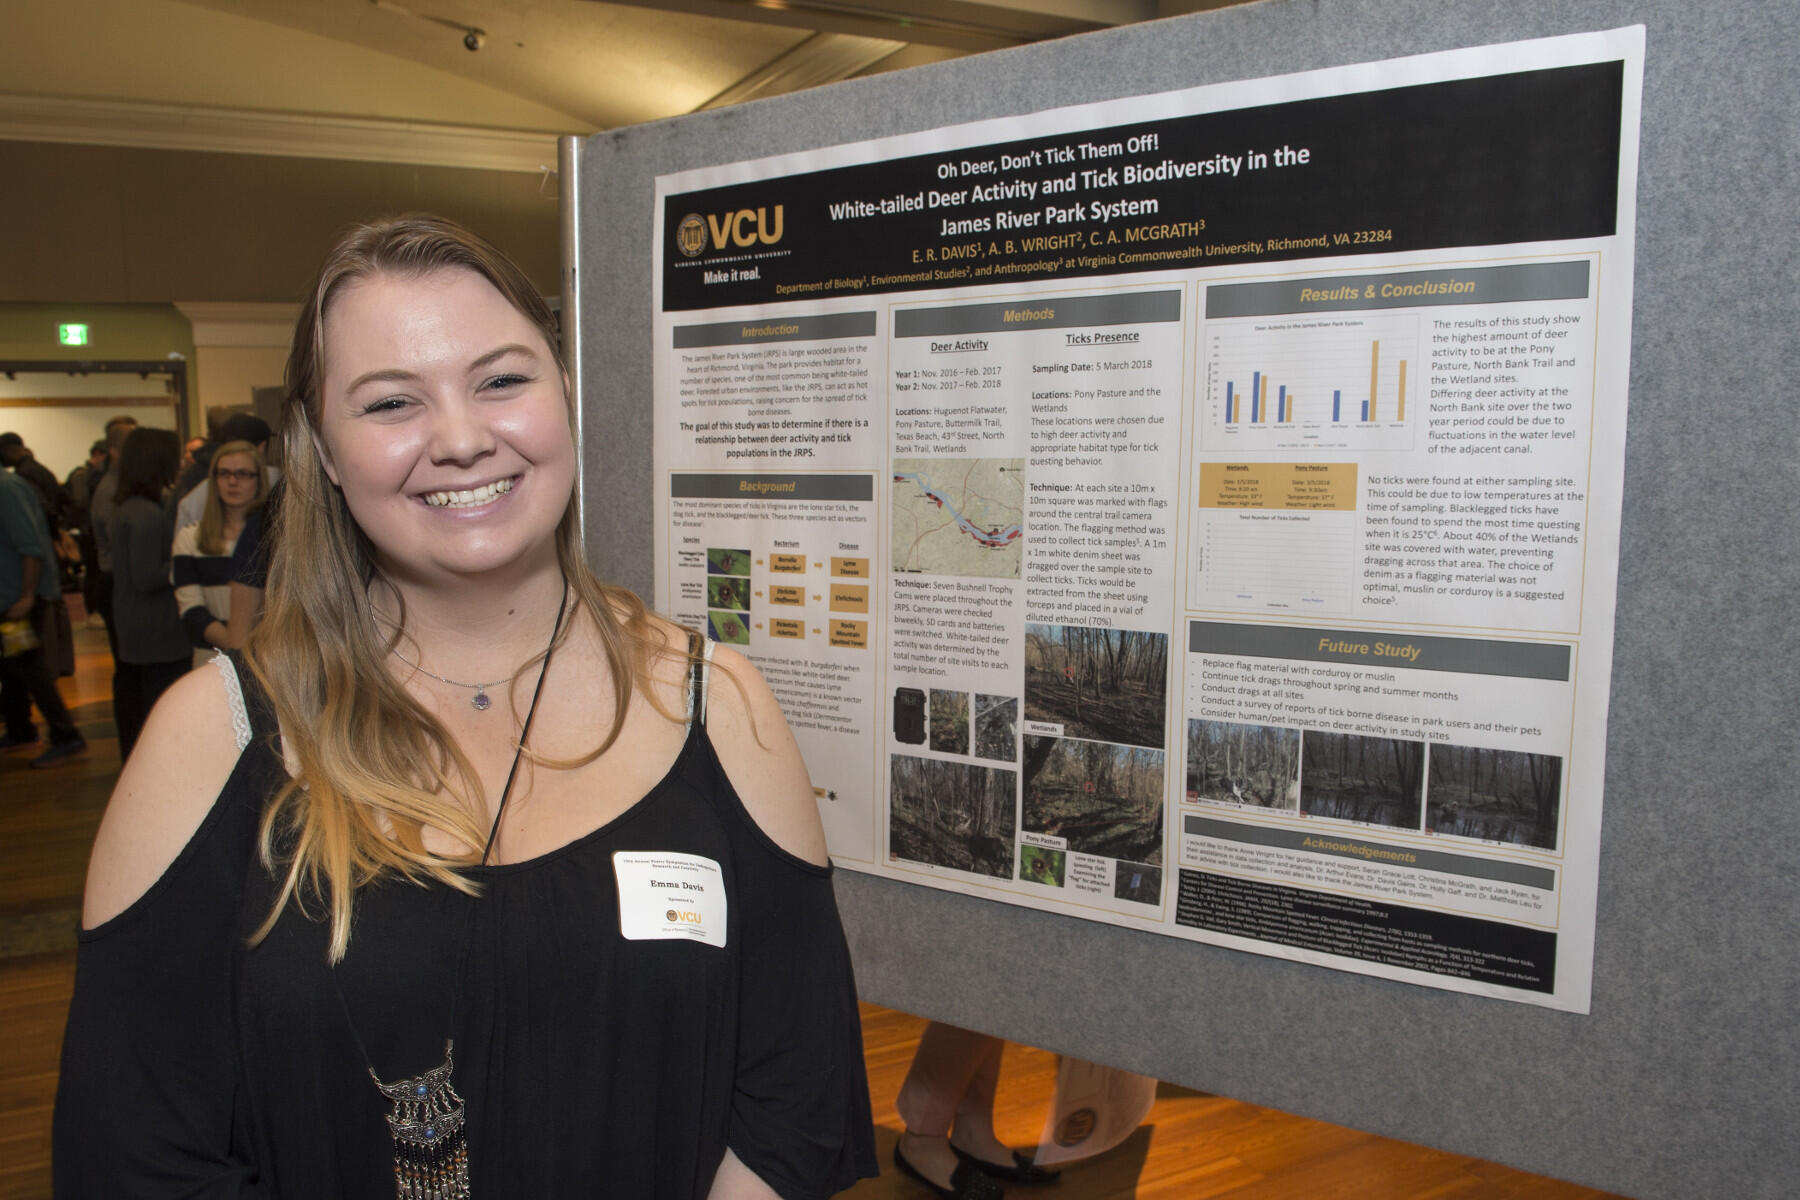 Emma Davis is studying tick biodiversity and the population of white-tailed deer.